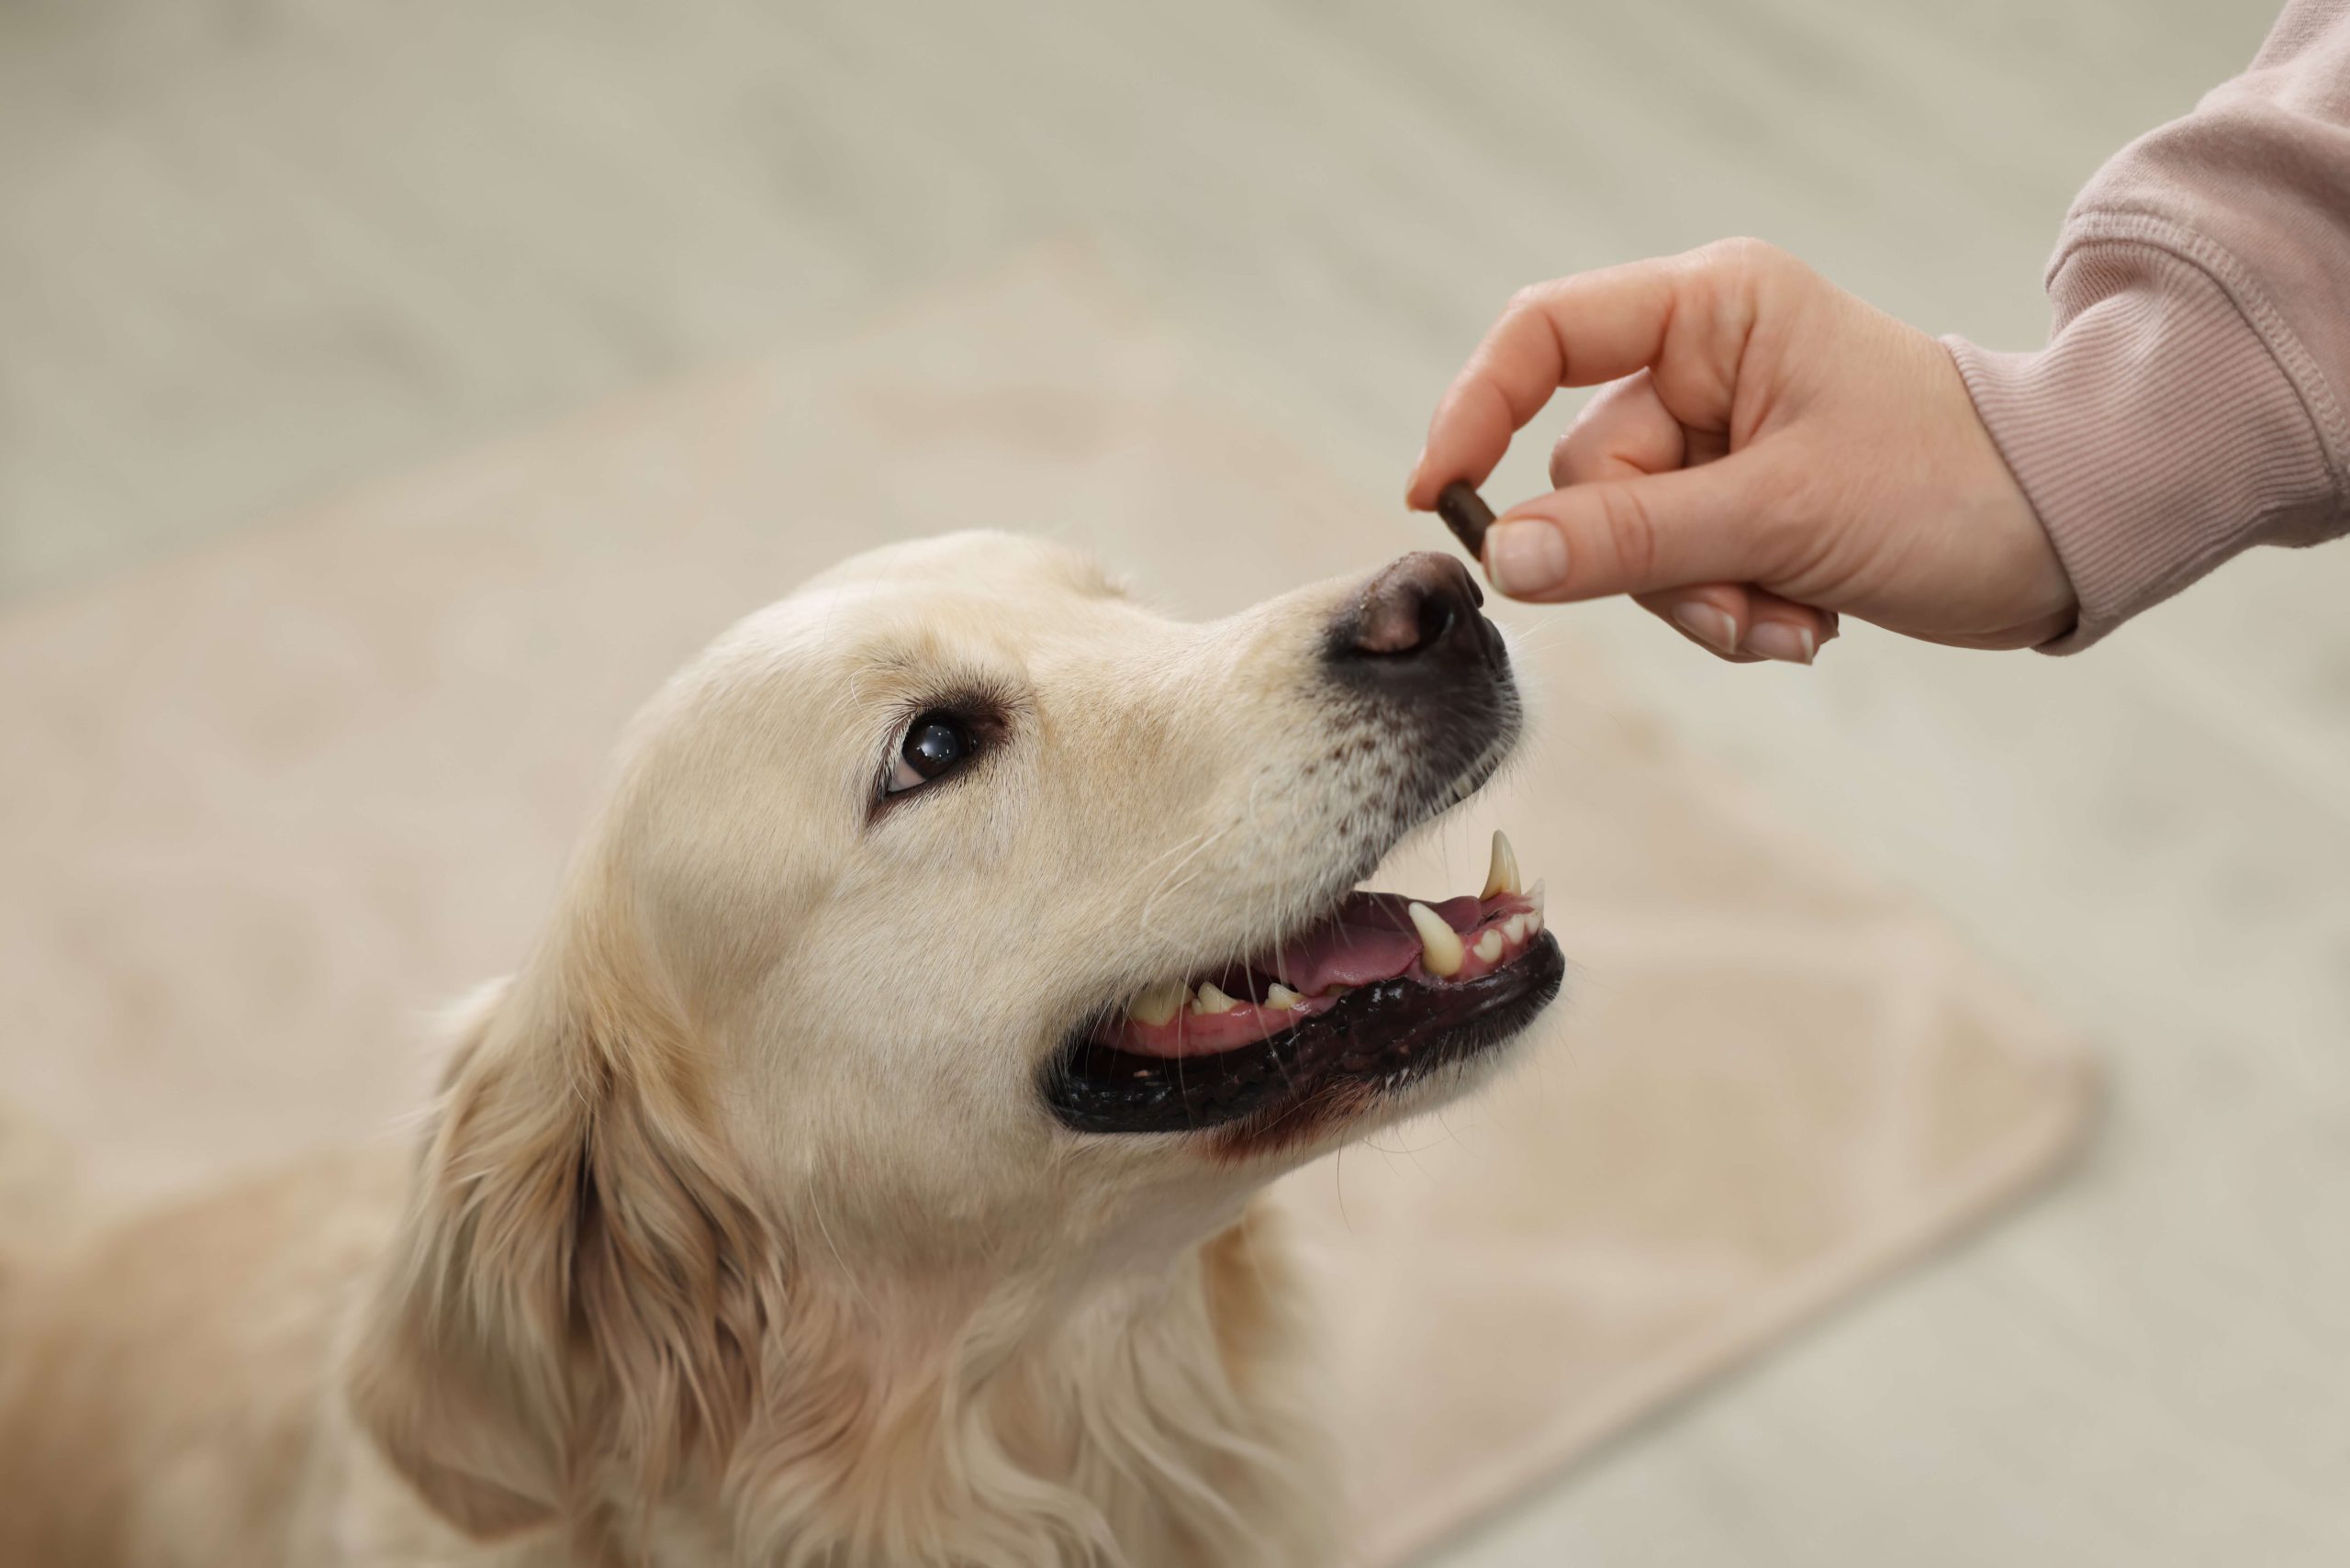 How to Handle Dog Diarrhea: The #1 Guide for Diarrhea in Dogs